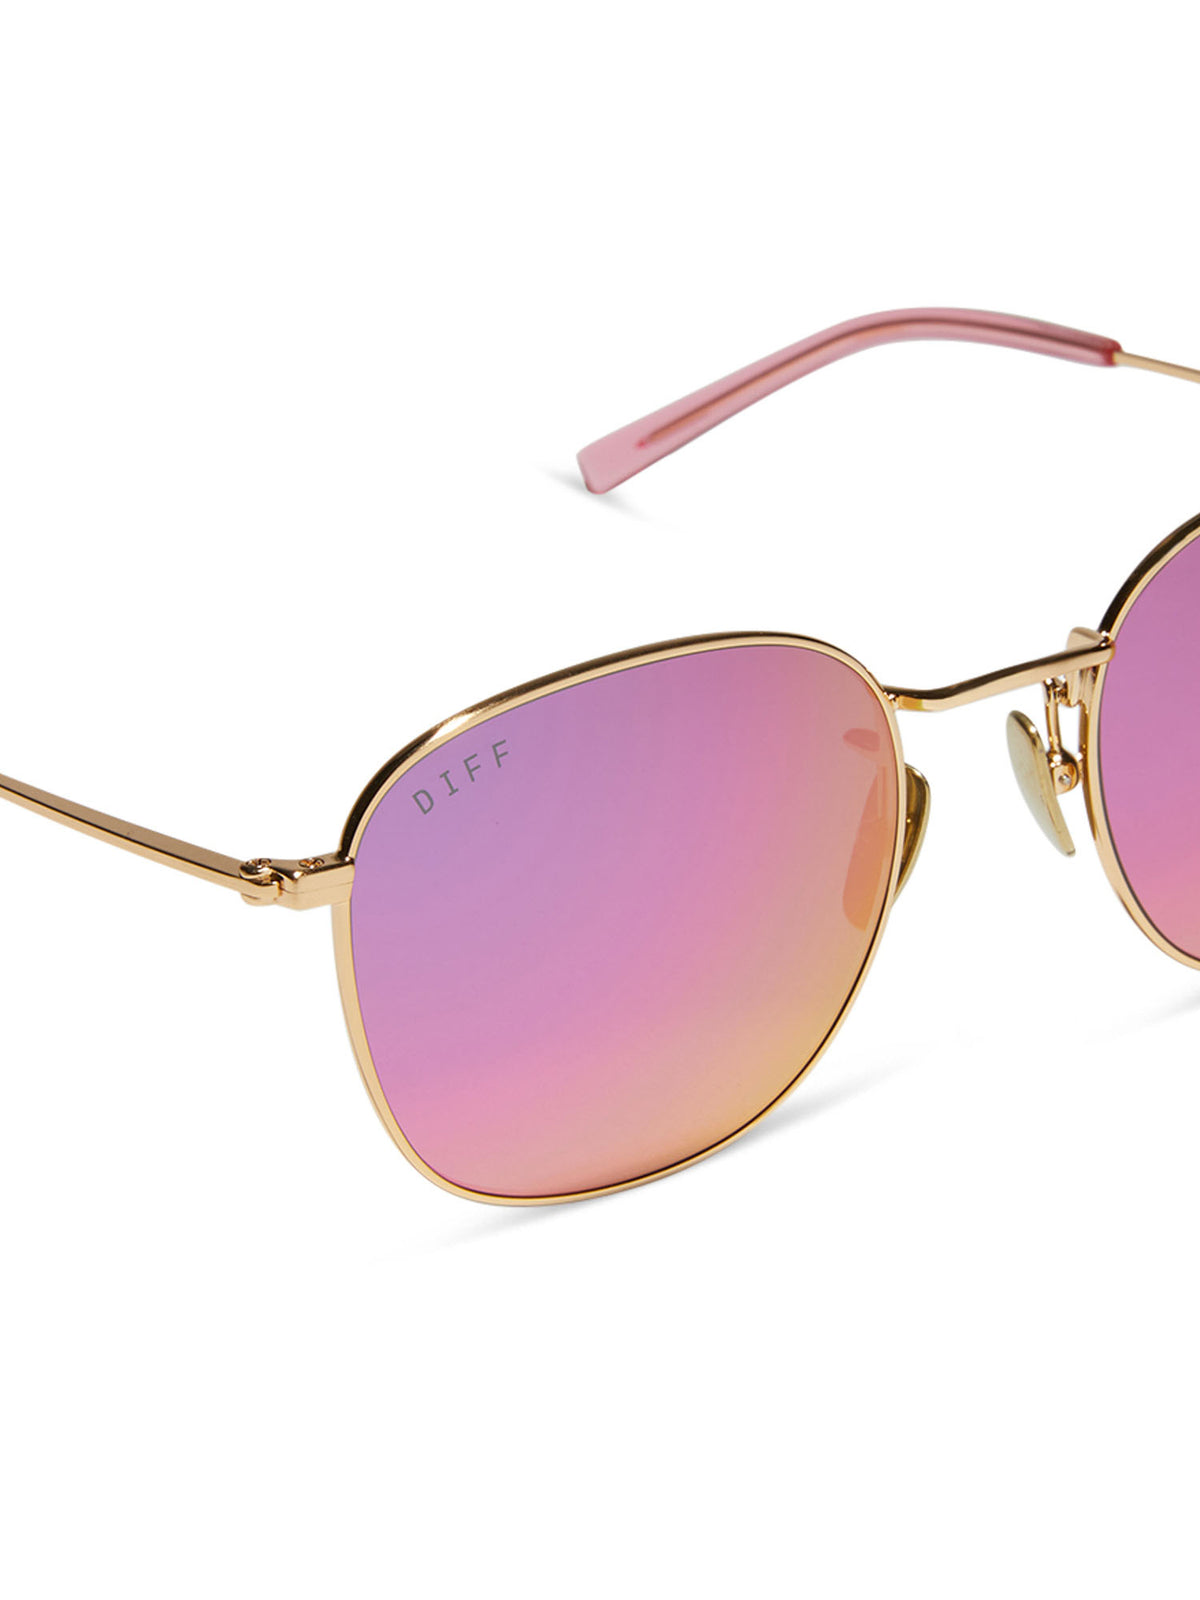 diff eyewear axel sunglasses in gold and pink rush mirror